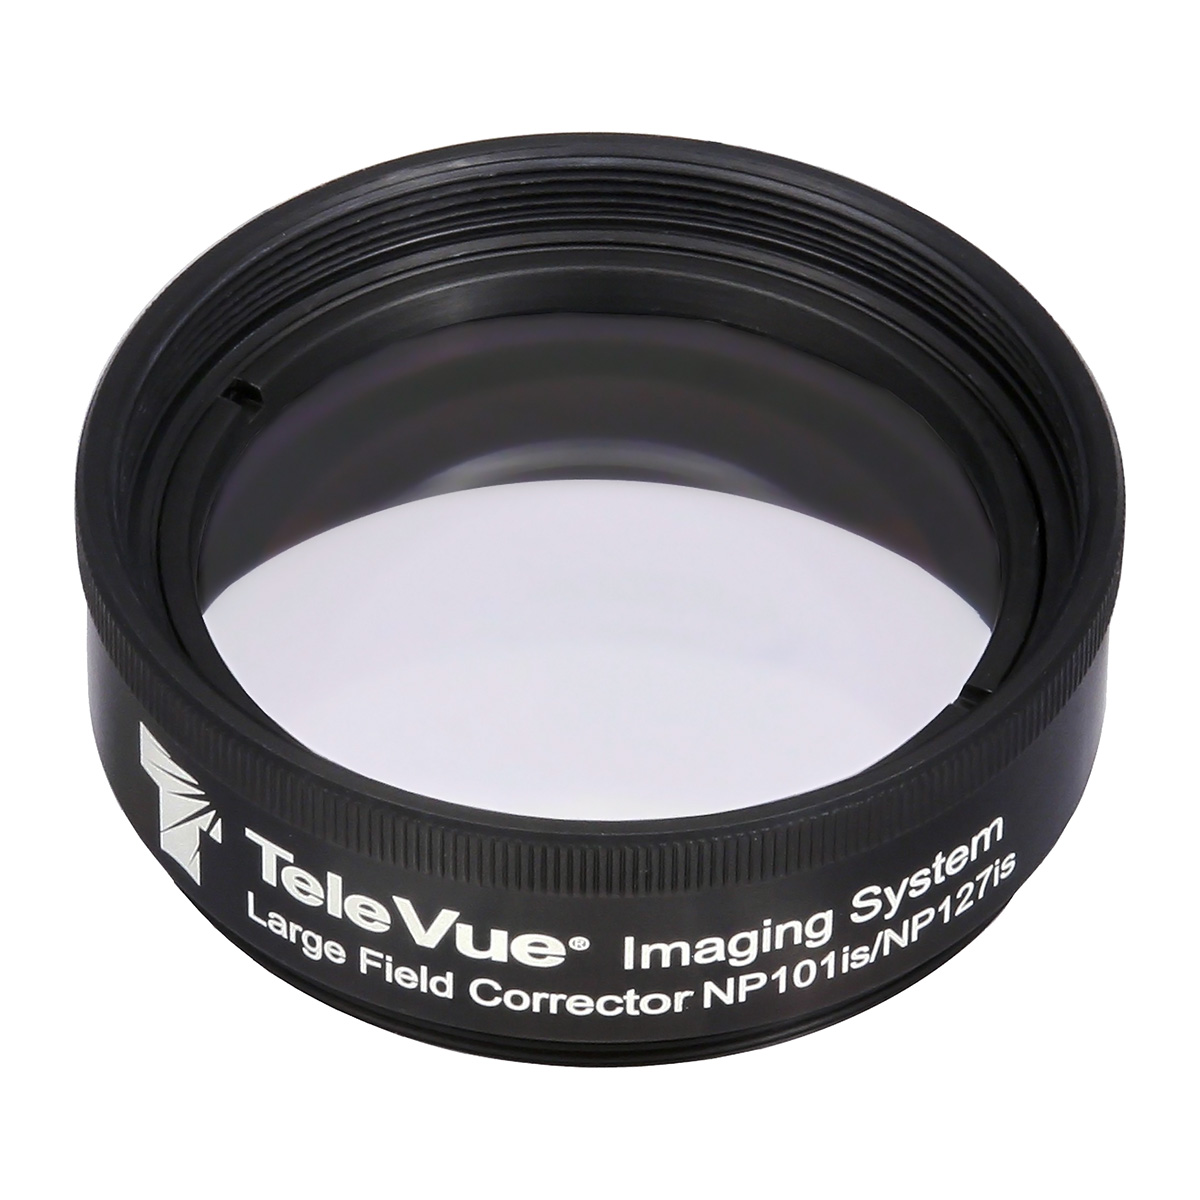 Tele Vue Large Field Corrector for NP101is